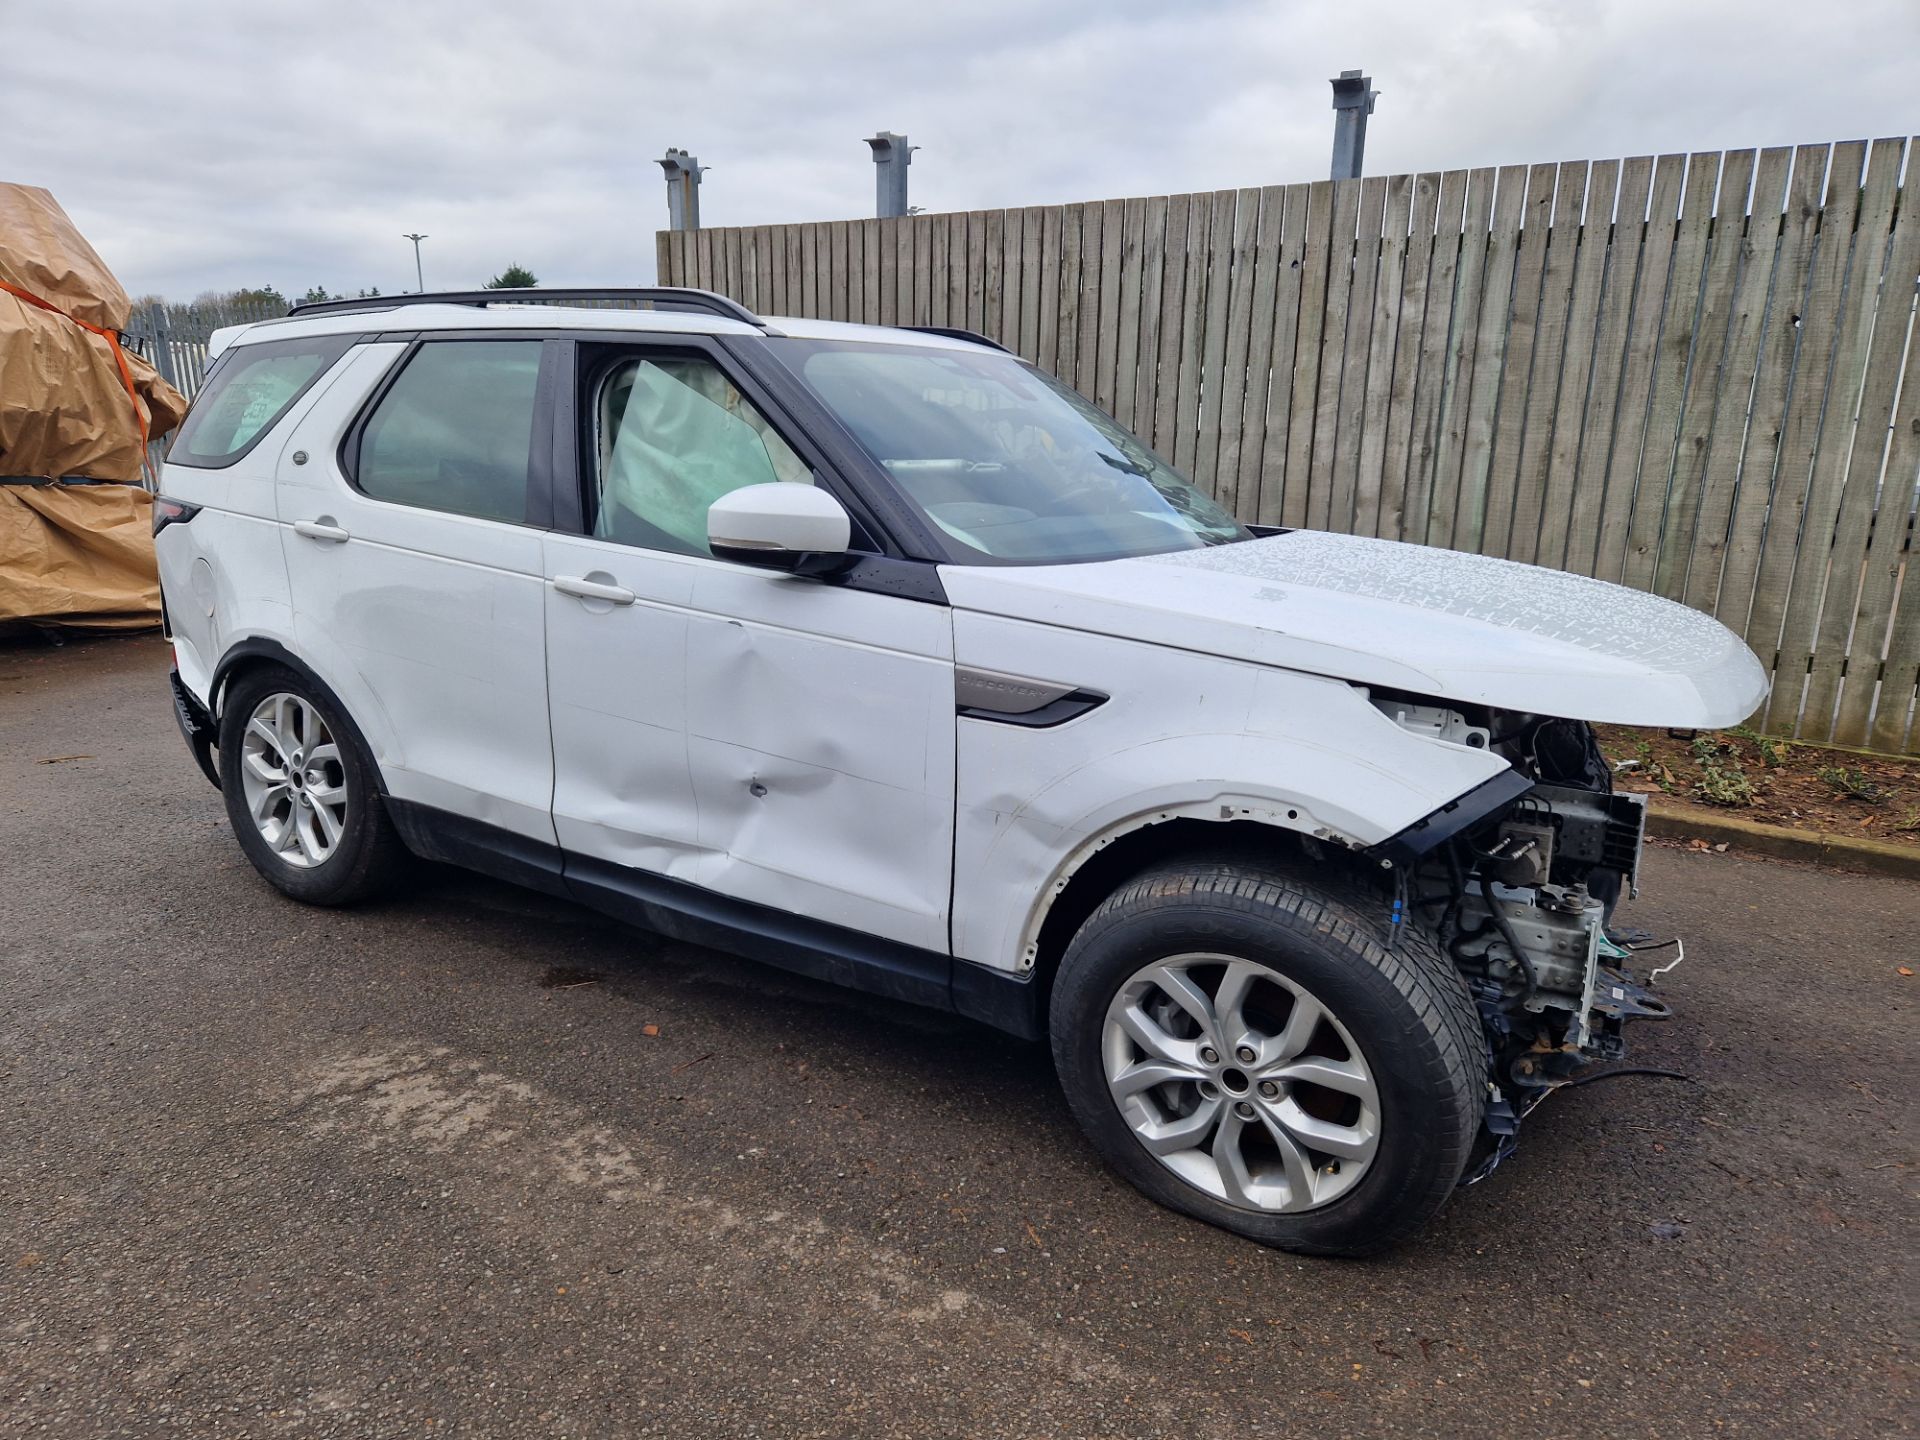 BA68 OZO - 2018 Land Rover Discovery 5 SDV6 3.0 DSE - Image 2 of 17